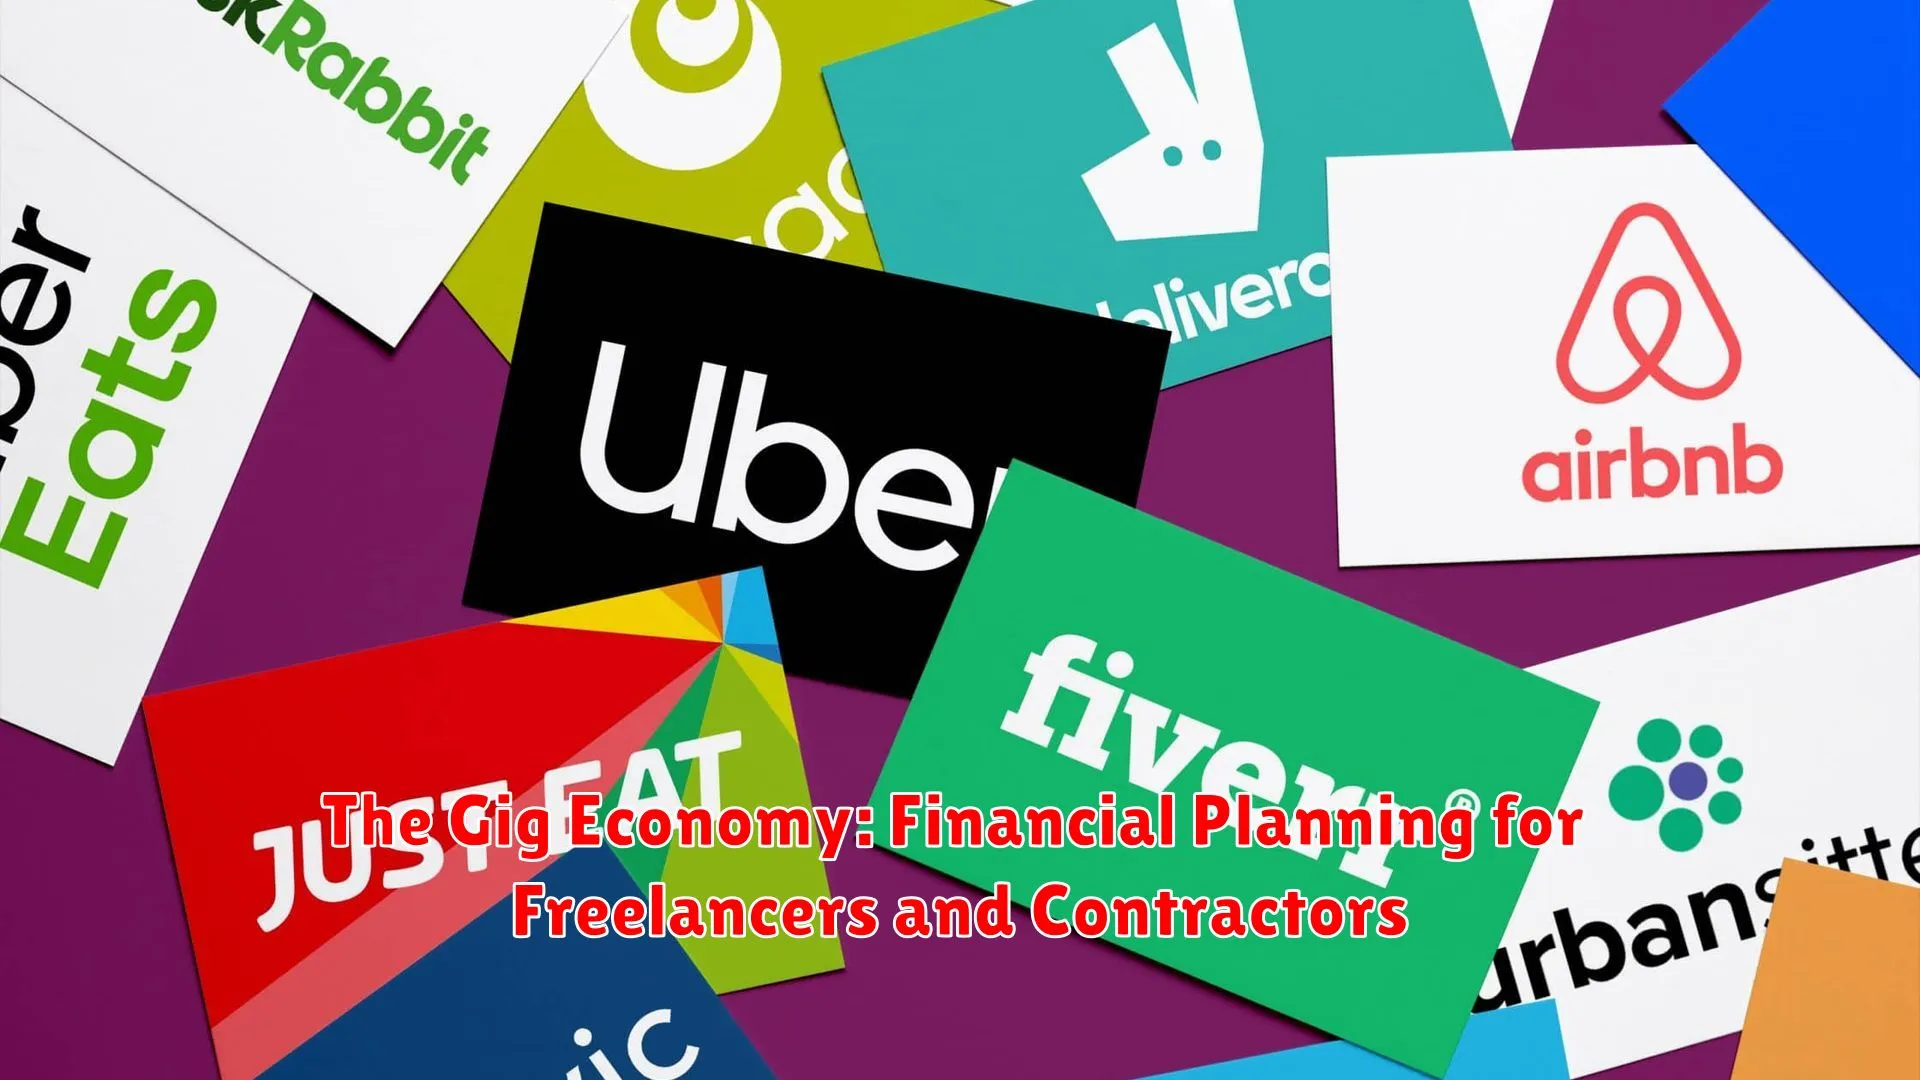 The Gig Economy: Financial Planning for Freelancers and Contractors